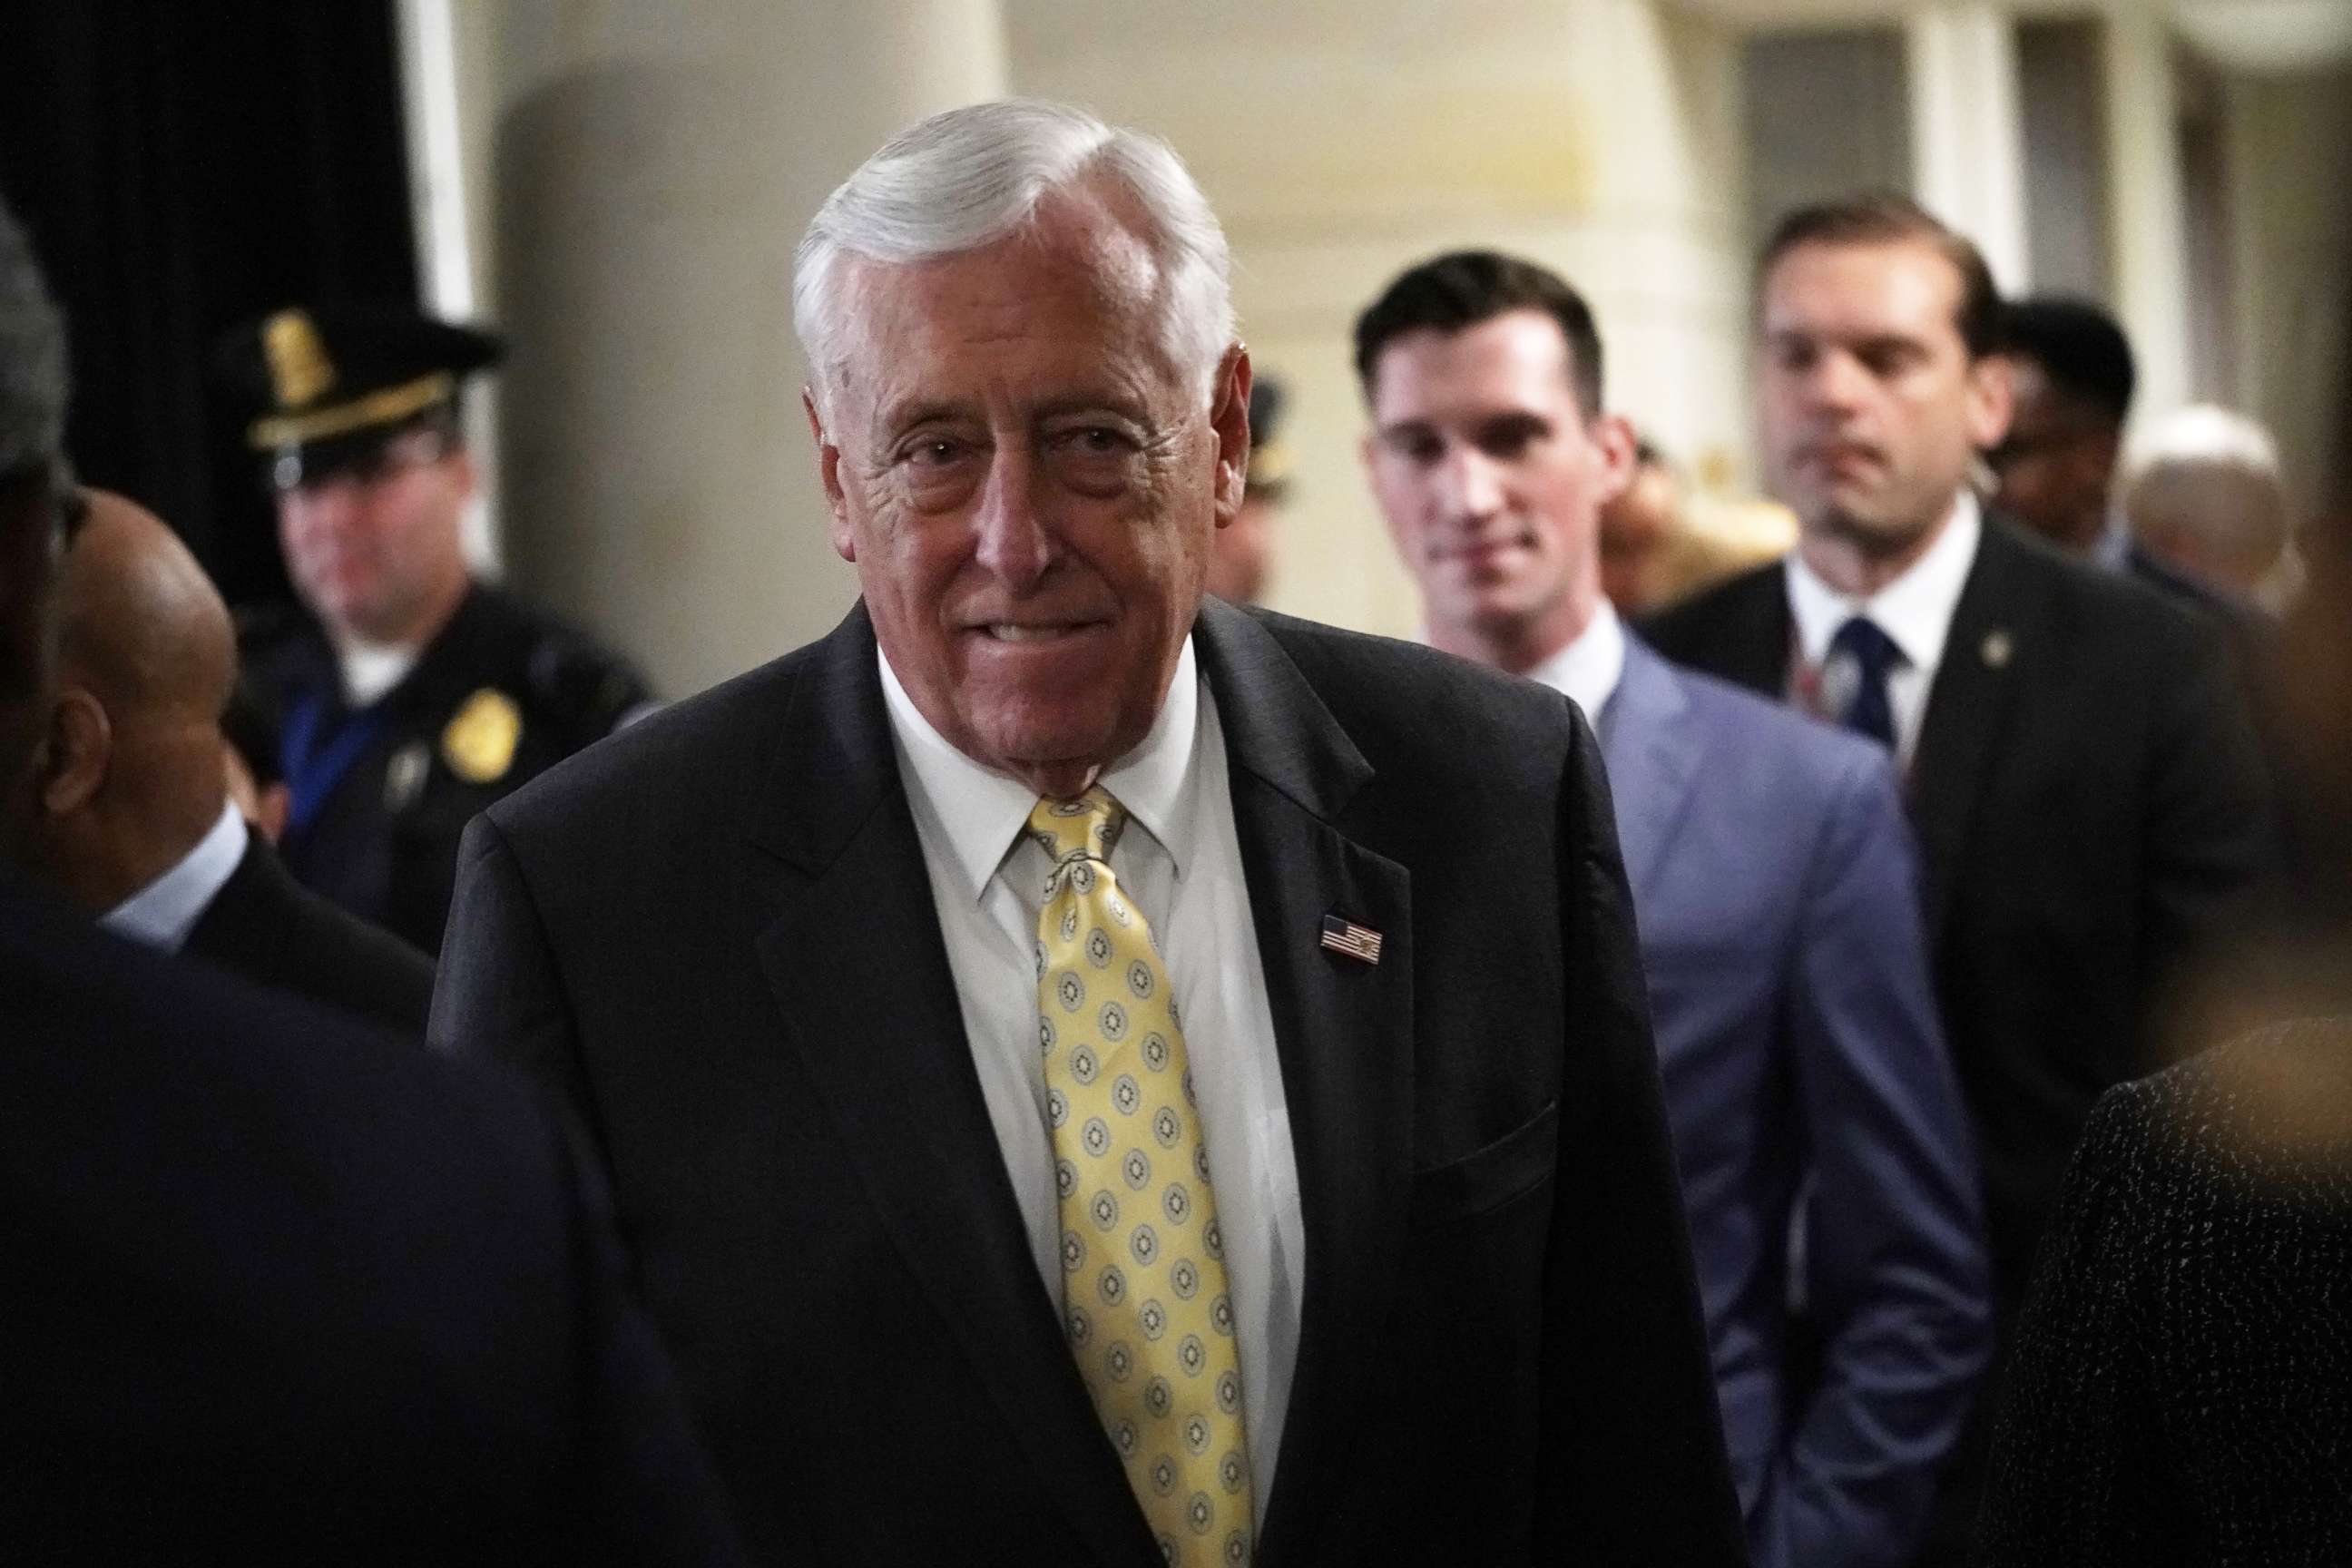 PHOTO: House Minority Whip Rep. Steny Hoyer (D-MD) leaves after a session of House Democrats organizational meeting, Nov. 28, 2018, in Washington, D.C.